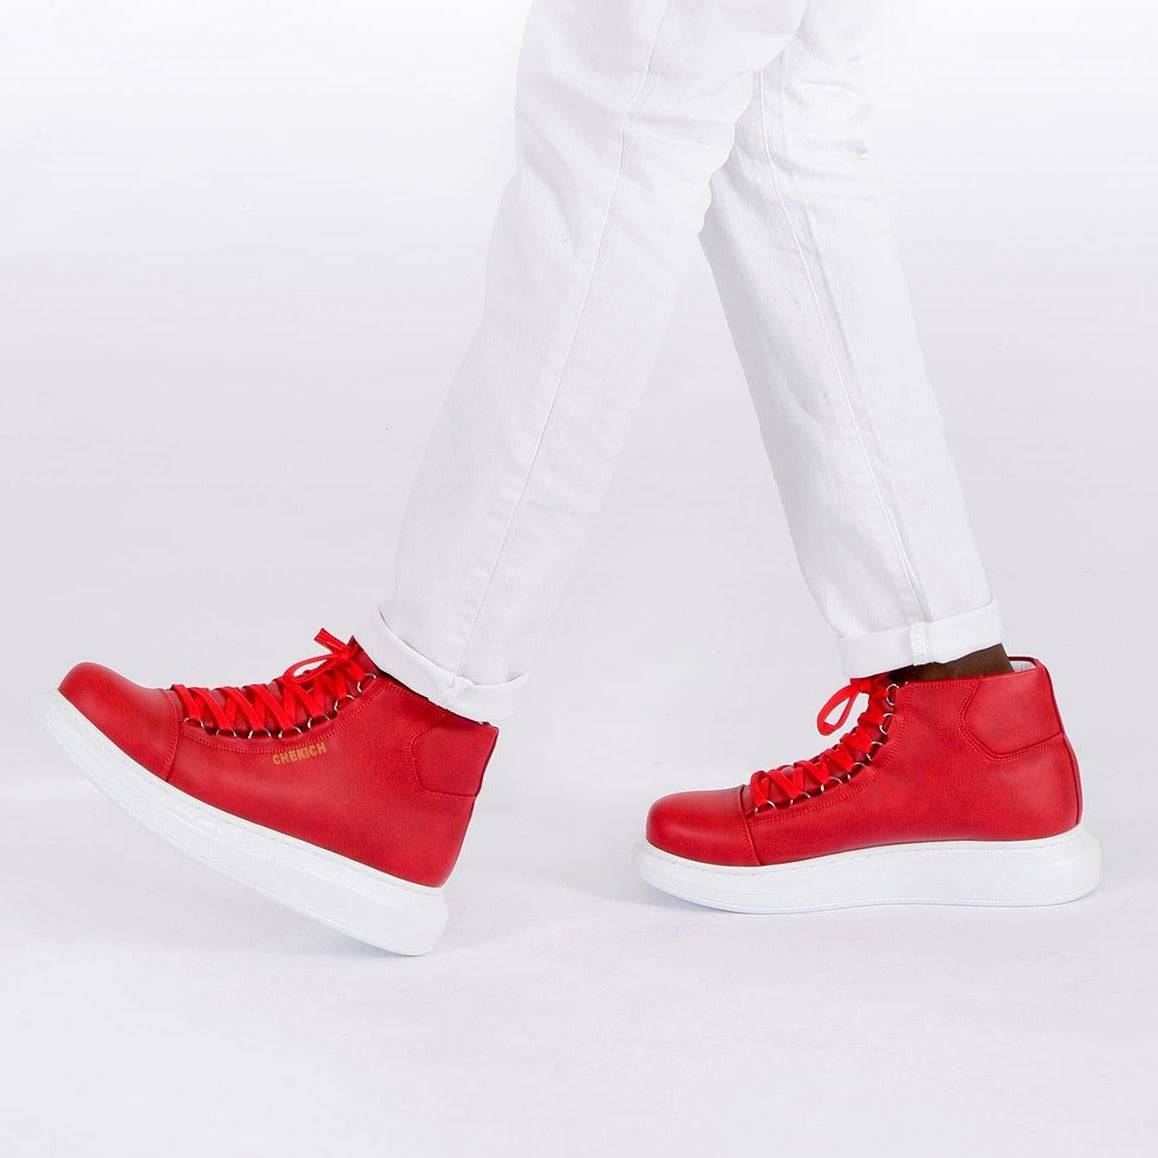 High Top Platform Sneakers for Women by Apollo | Kelly in Ruby Radiance